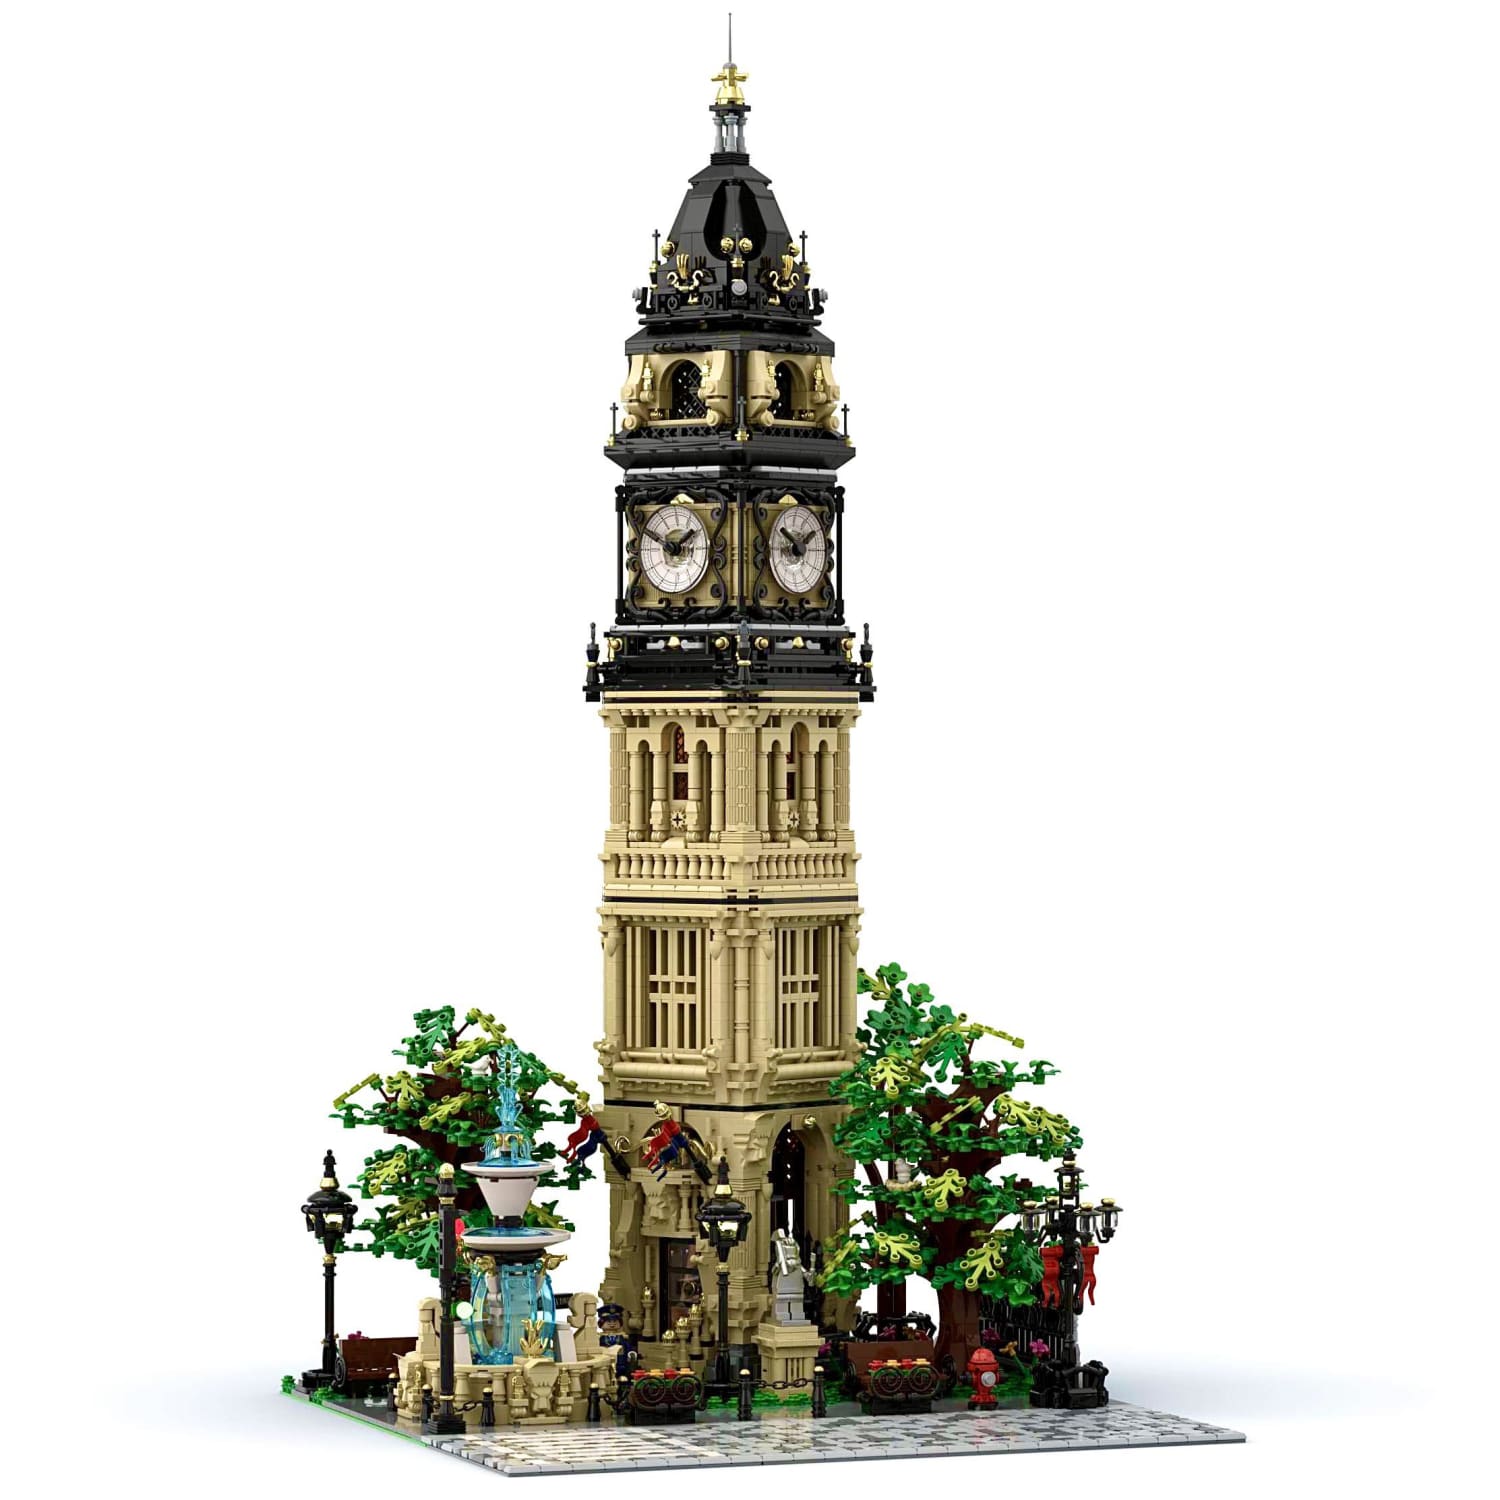 My real LEGO IDEAS miniworld 'The Clock Tower Park' - If 10,000 votes are reached, you could also get my LEGO miniworld.